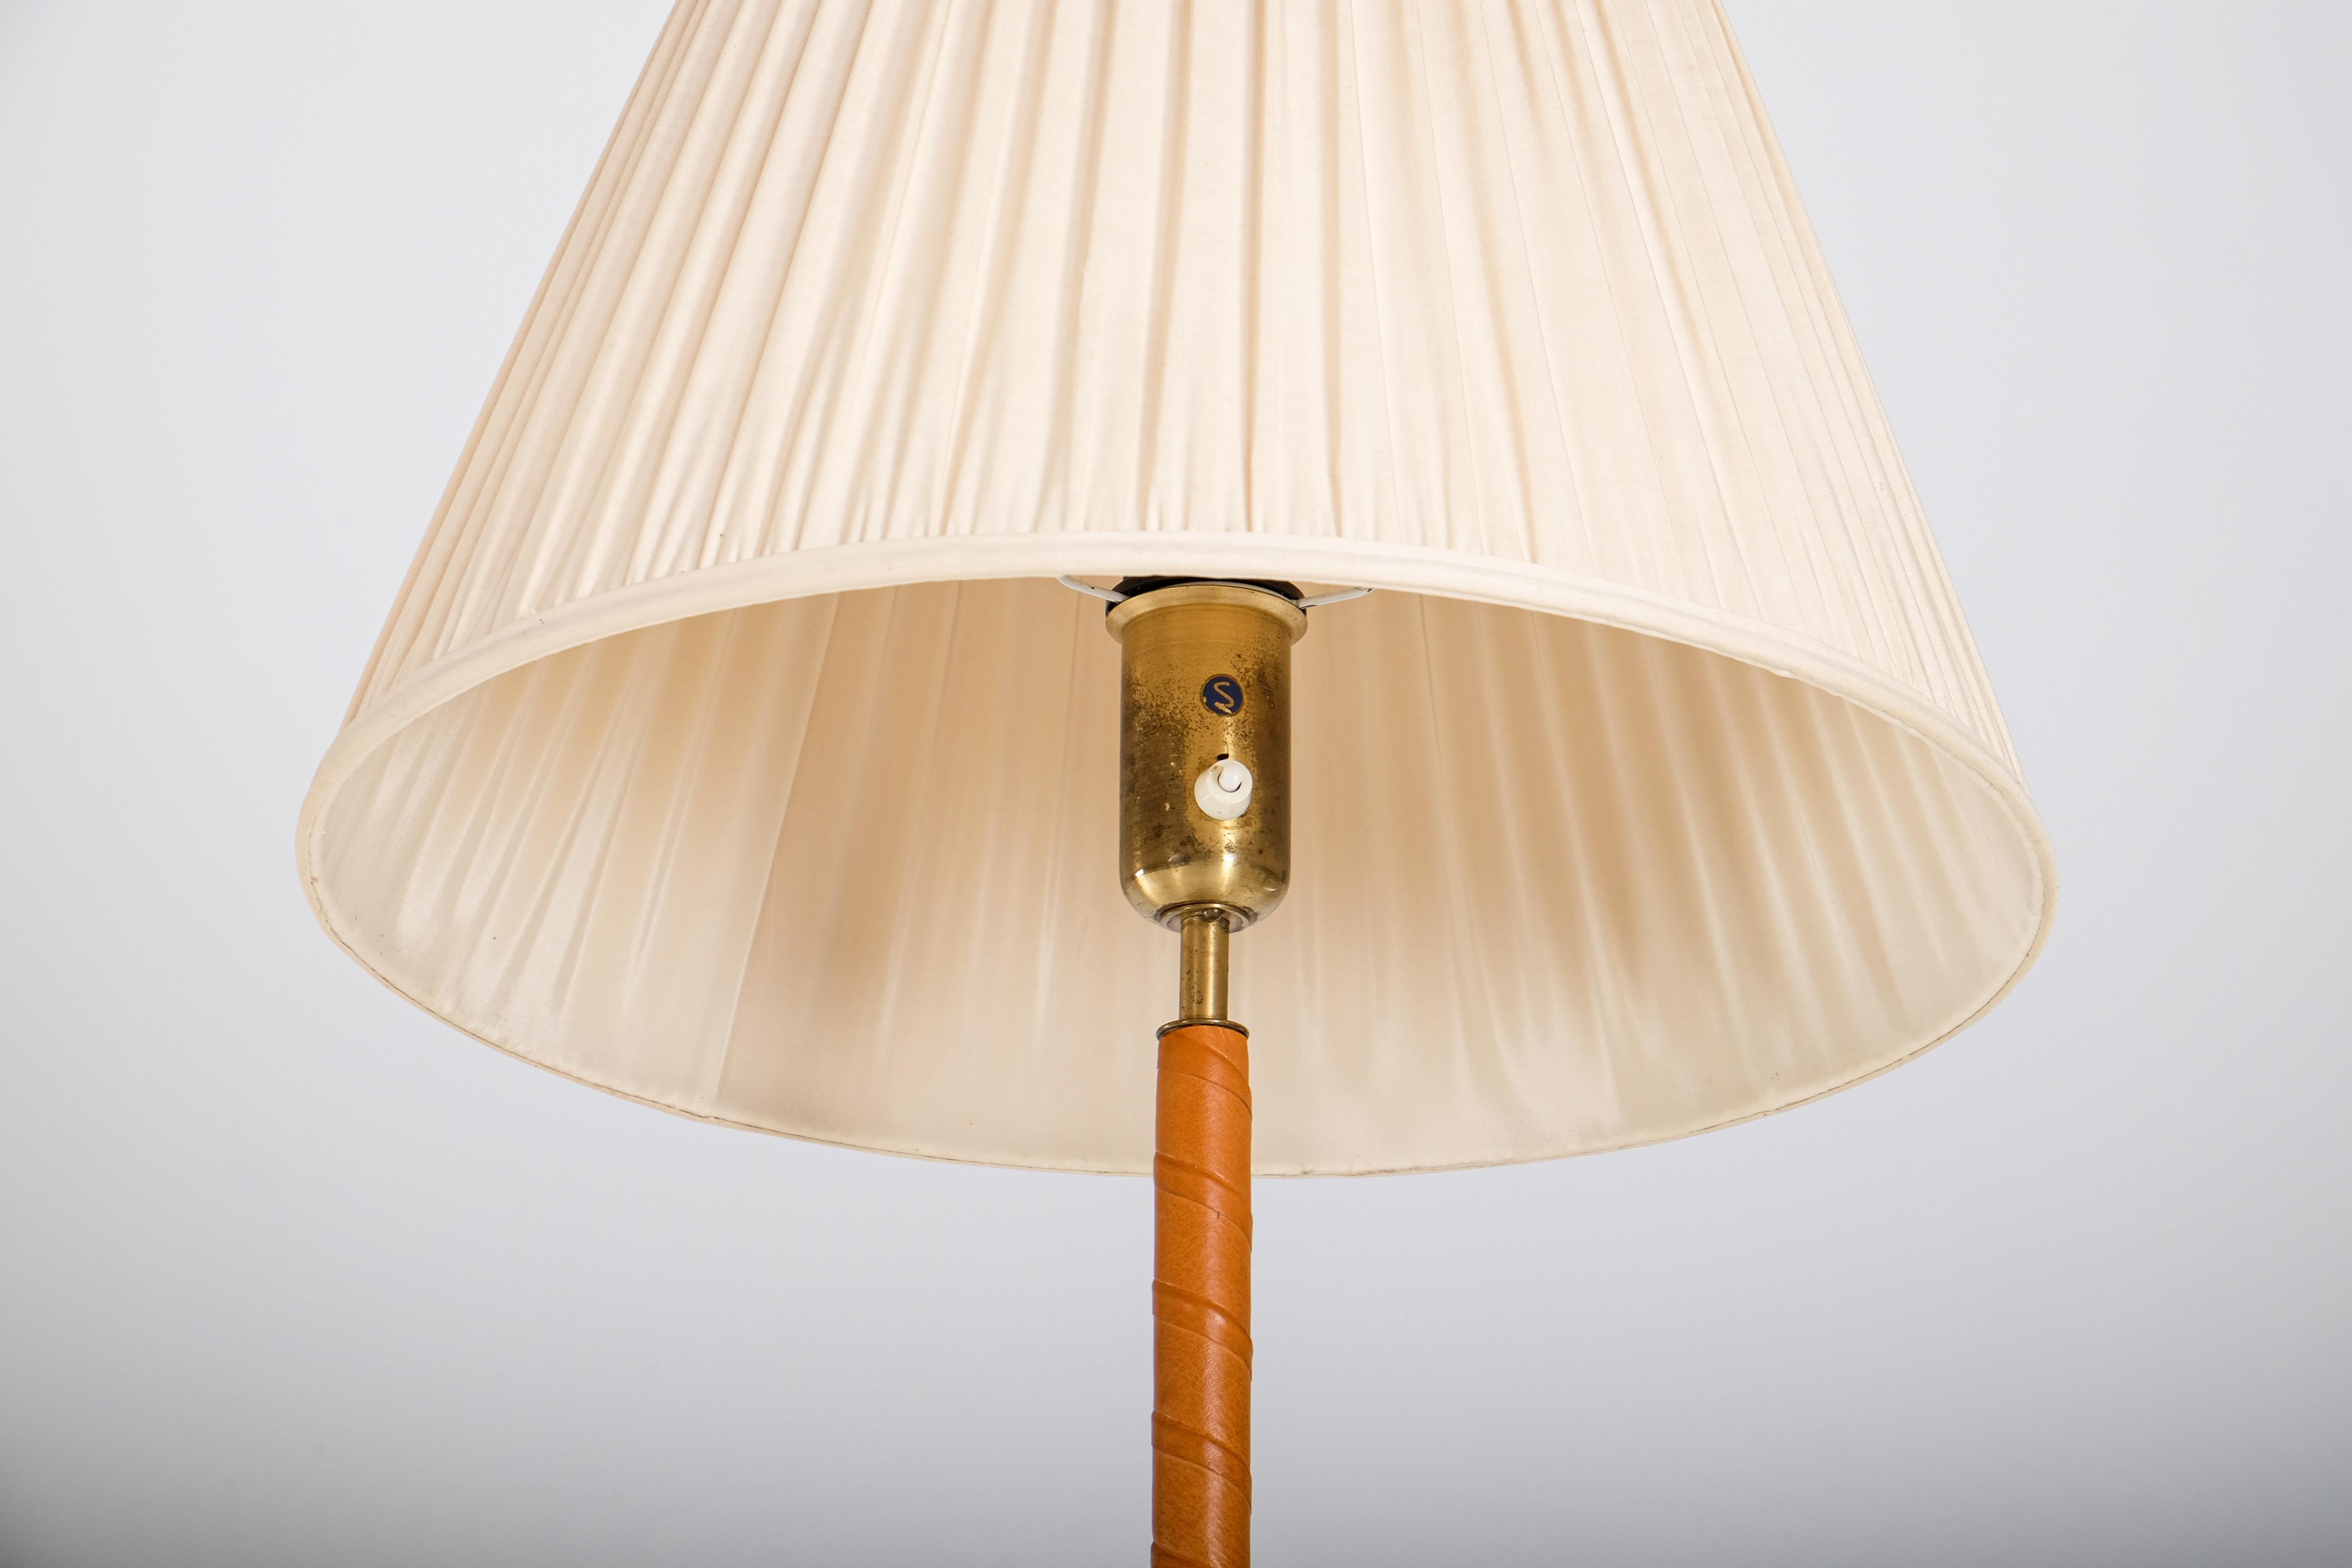 Brass & Leather Floor Lamps, Sweden, 1950s For Sale 1